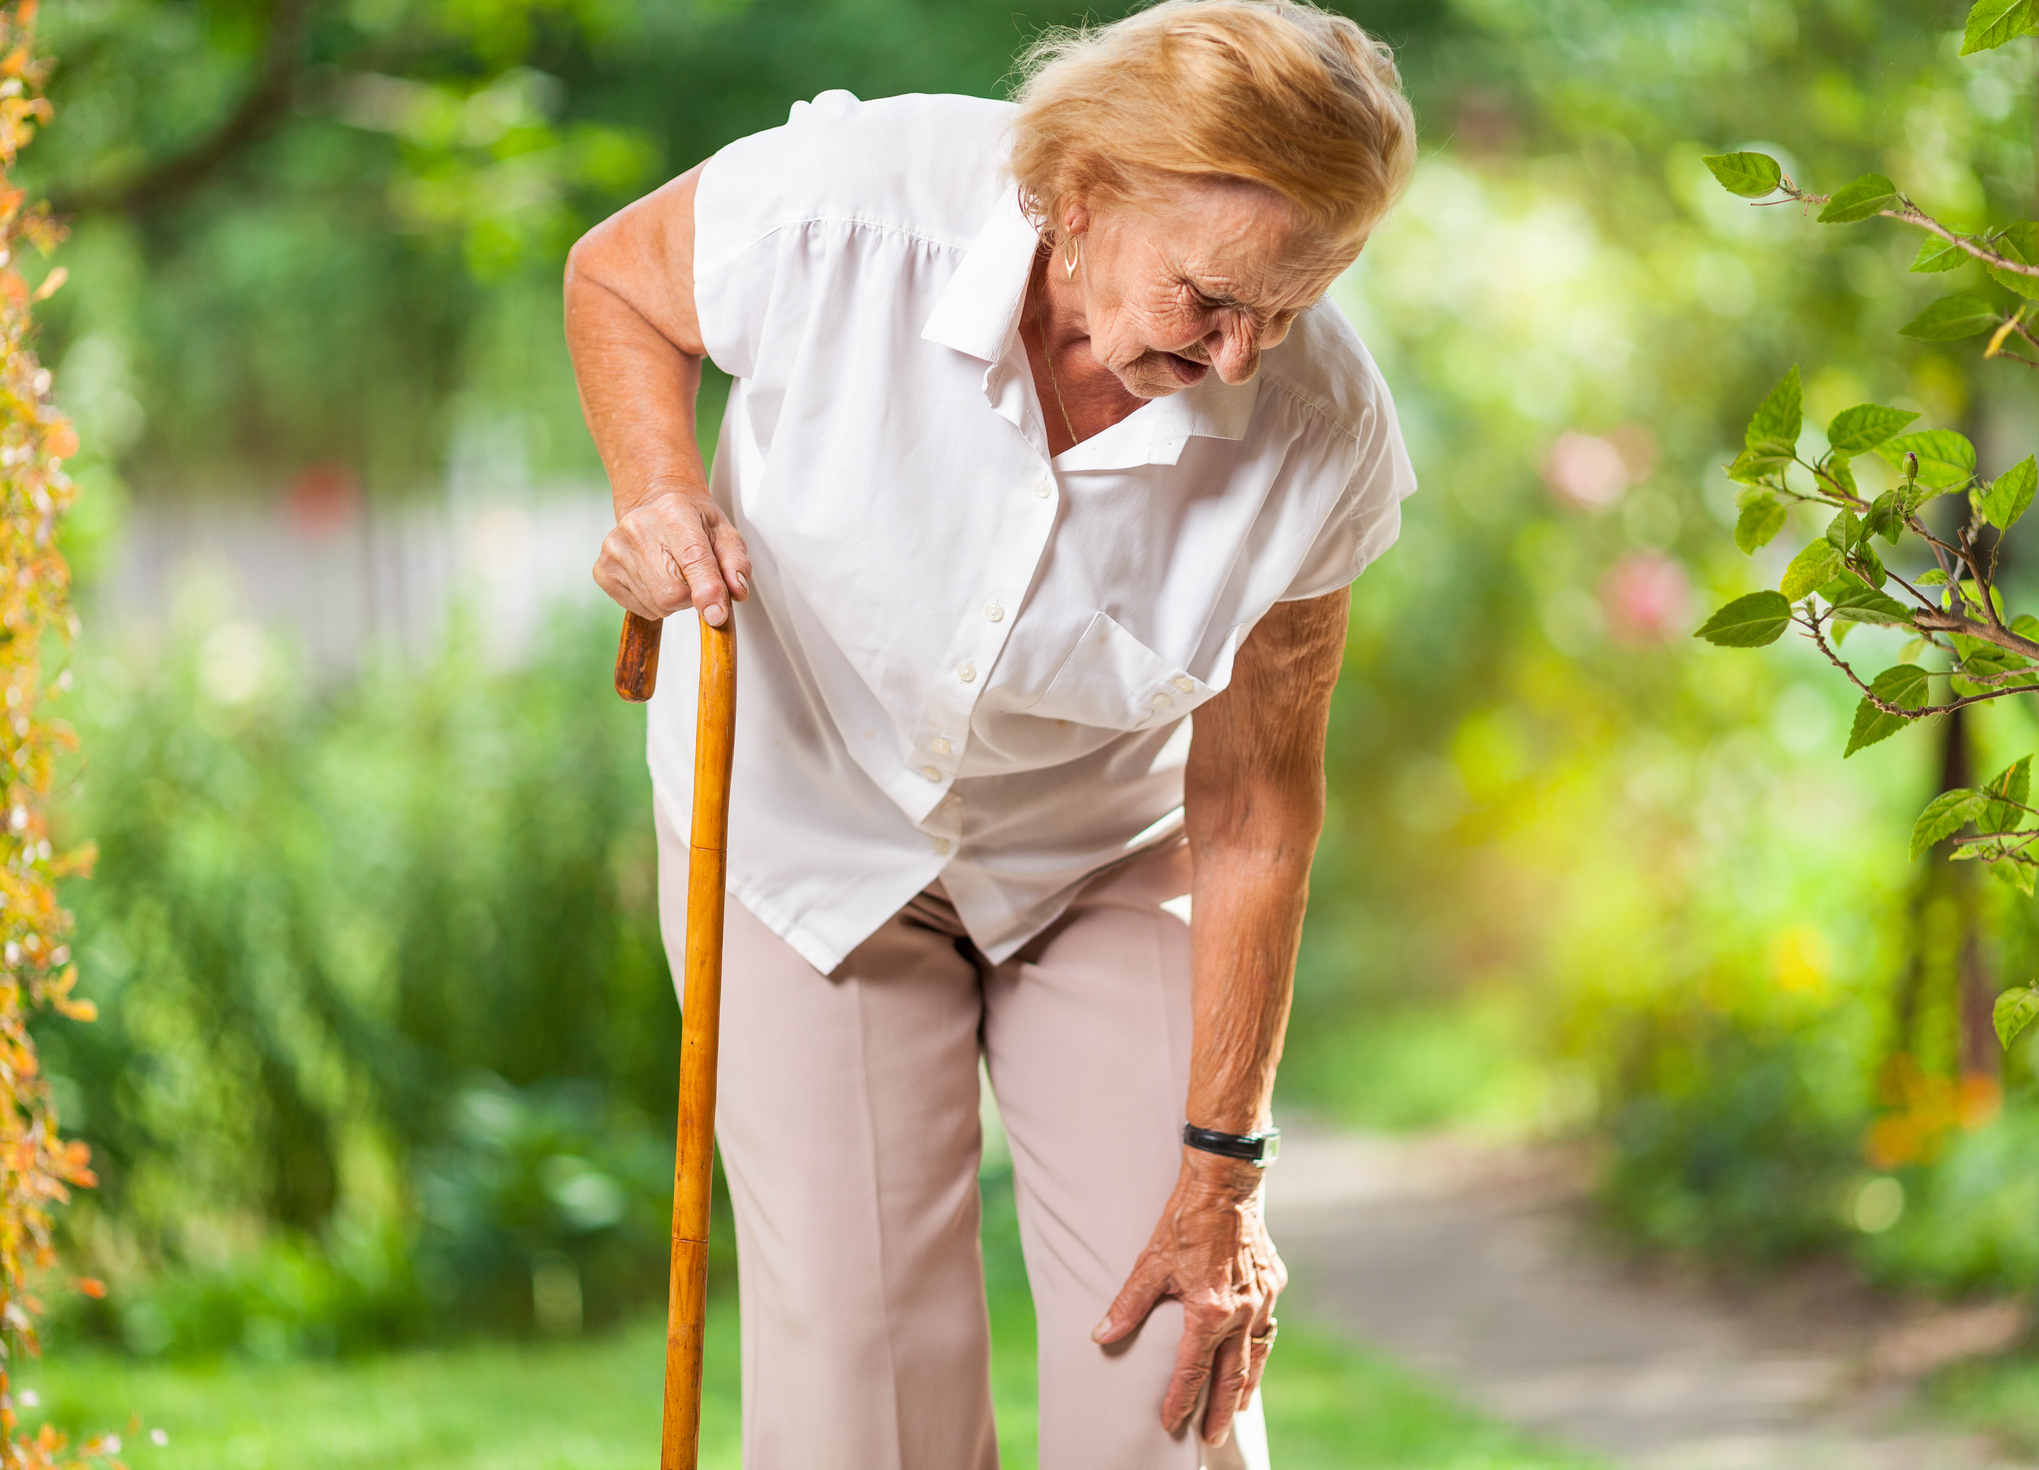 Fall risk in the elderly is increased when a senior has osteoarthritis.